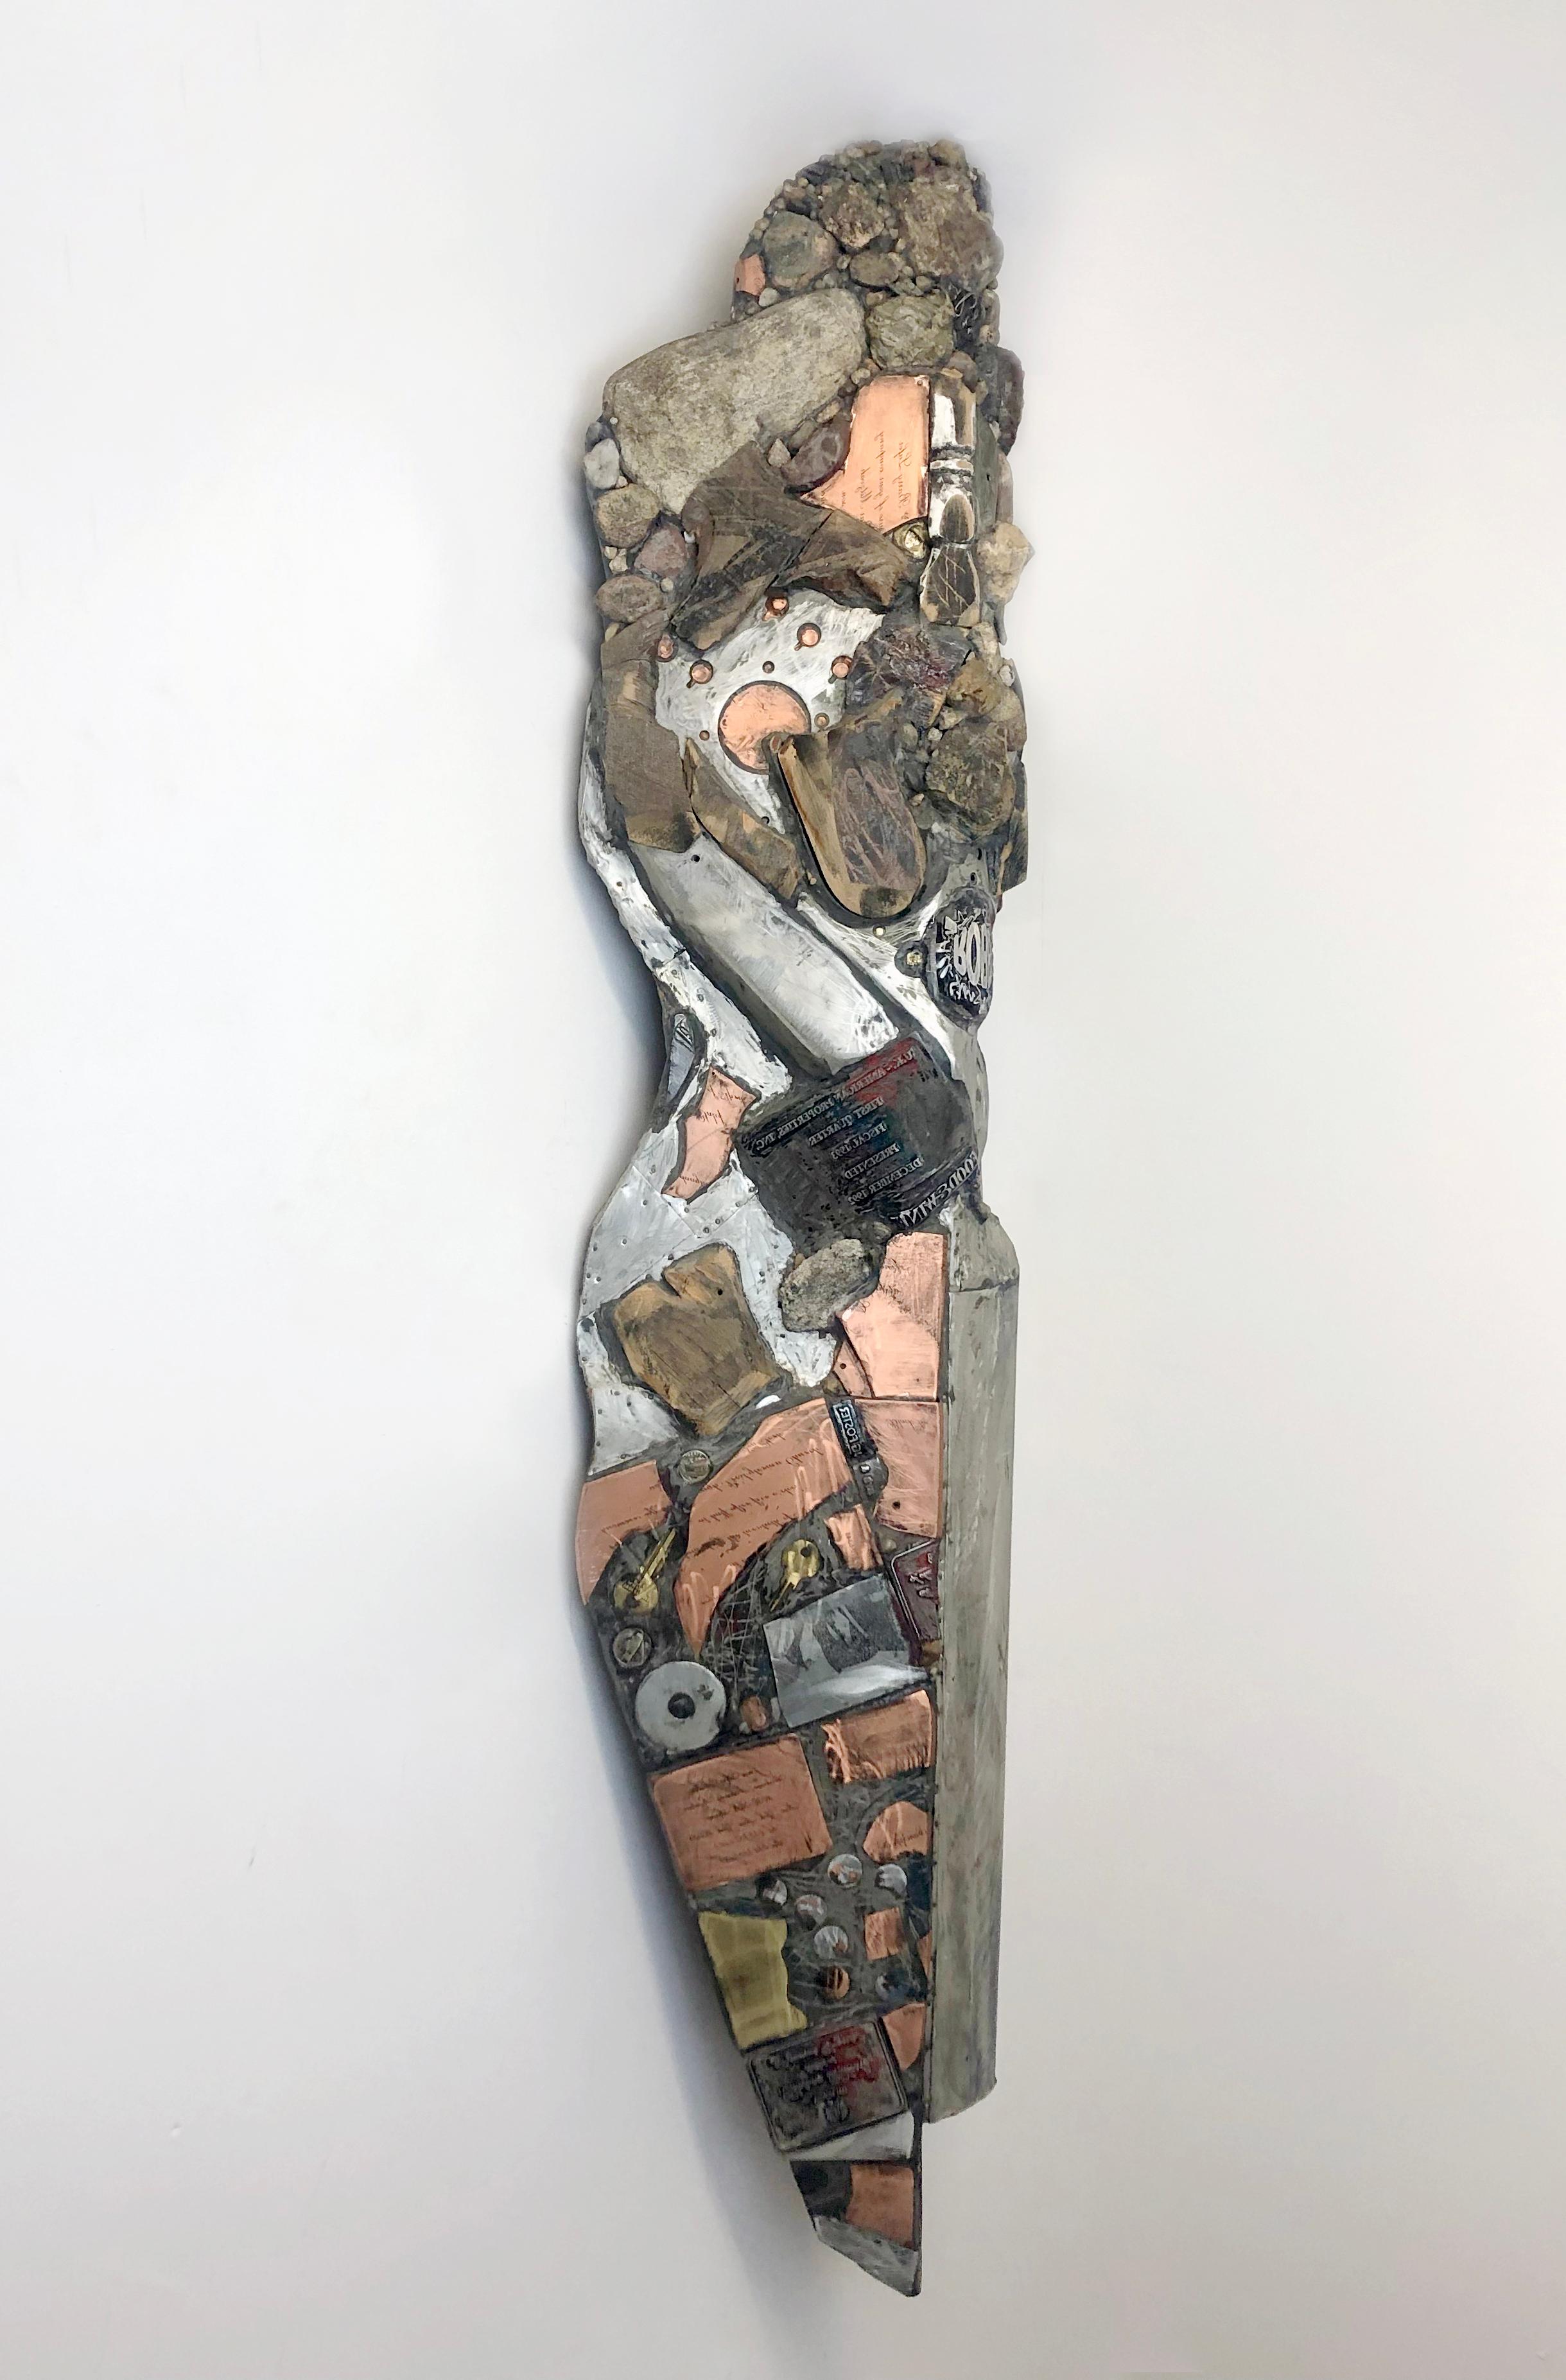 American Contemporary Mixed Media Sculpture - Linda Stein, Knight of Triumph 530 For Sale 1